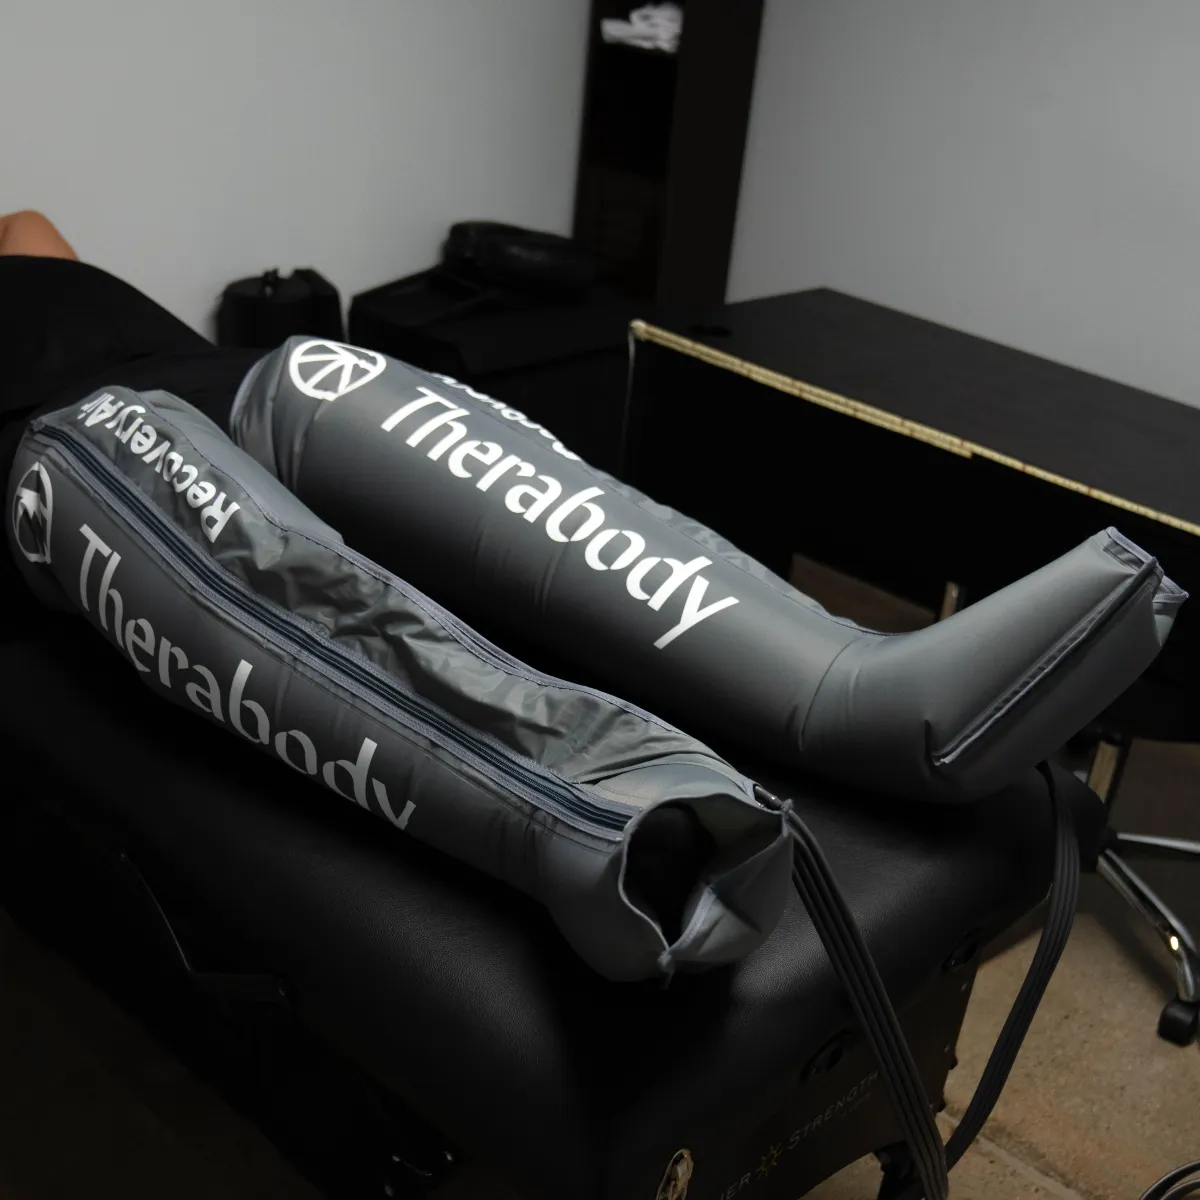 Pneumatic compression normatech therabody device